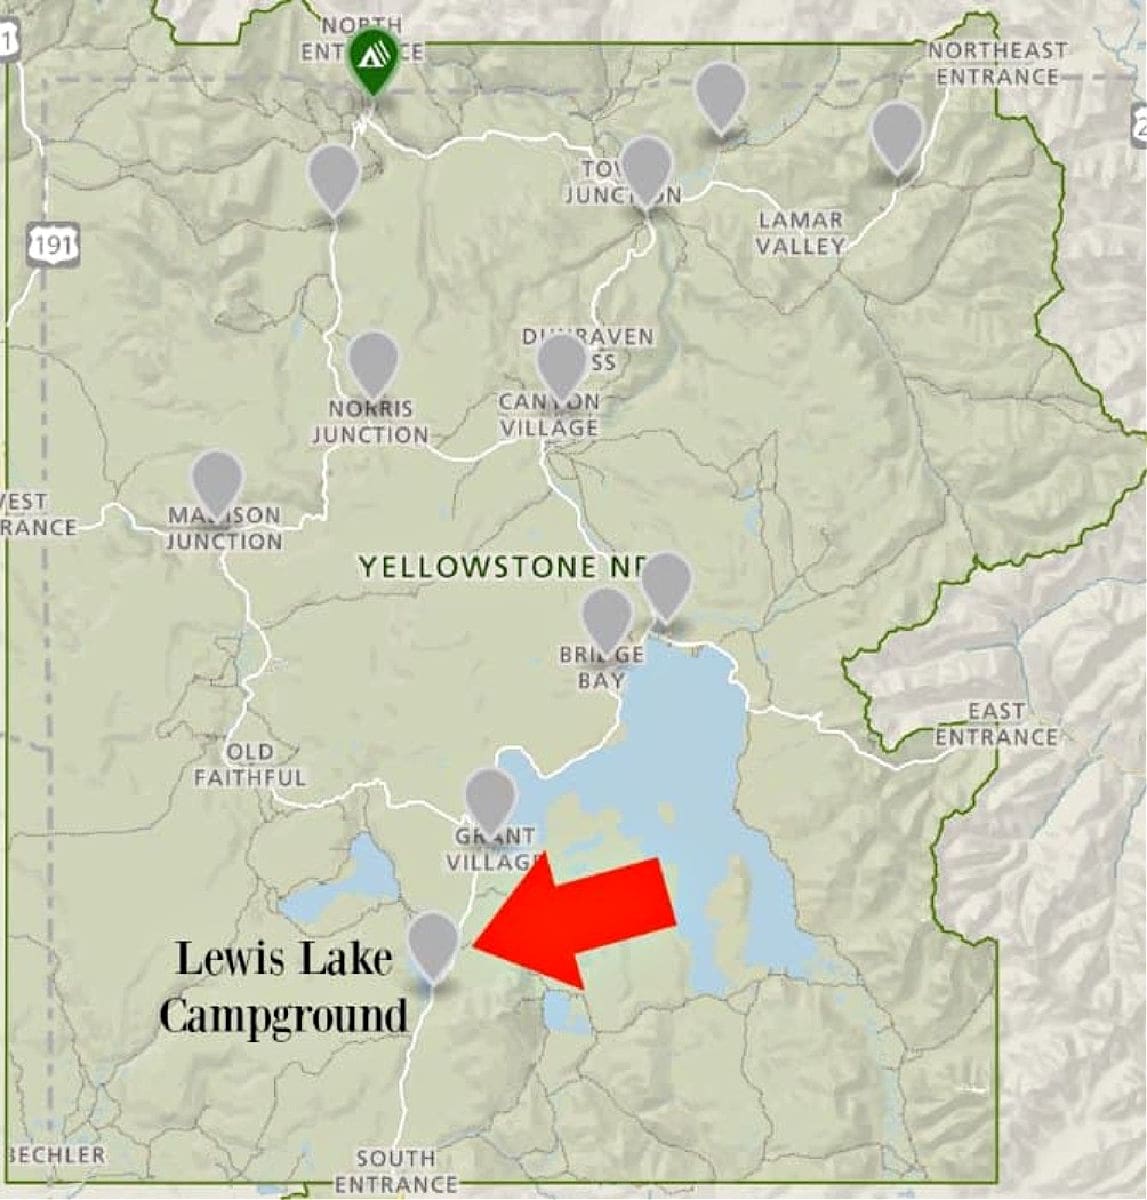 Location of Lewis Lake Campground in Yellowstone National Park